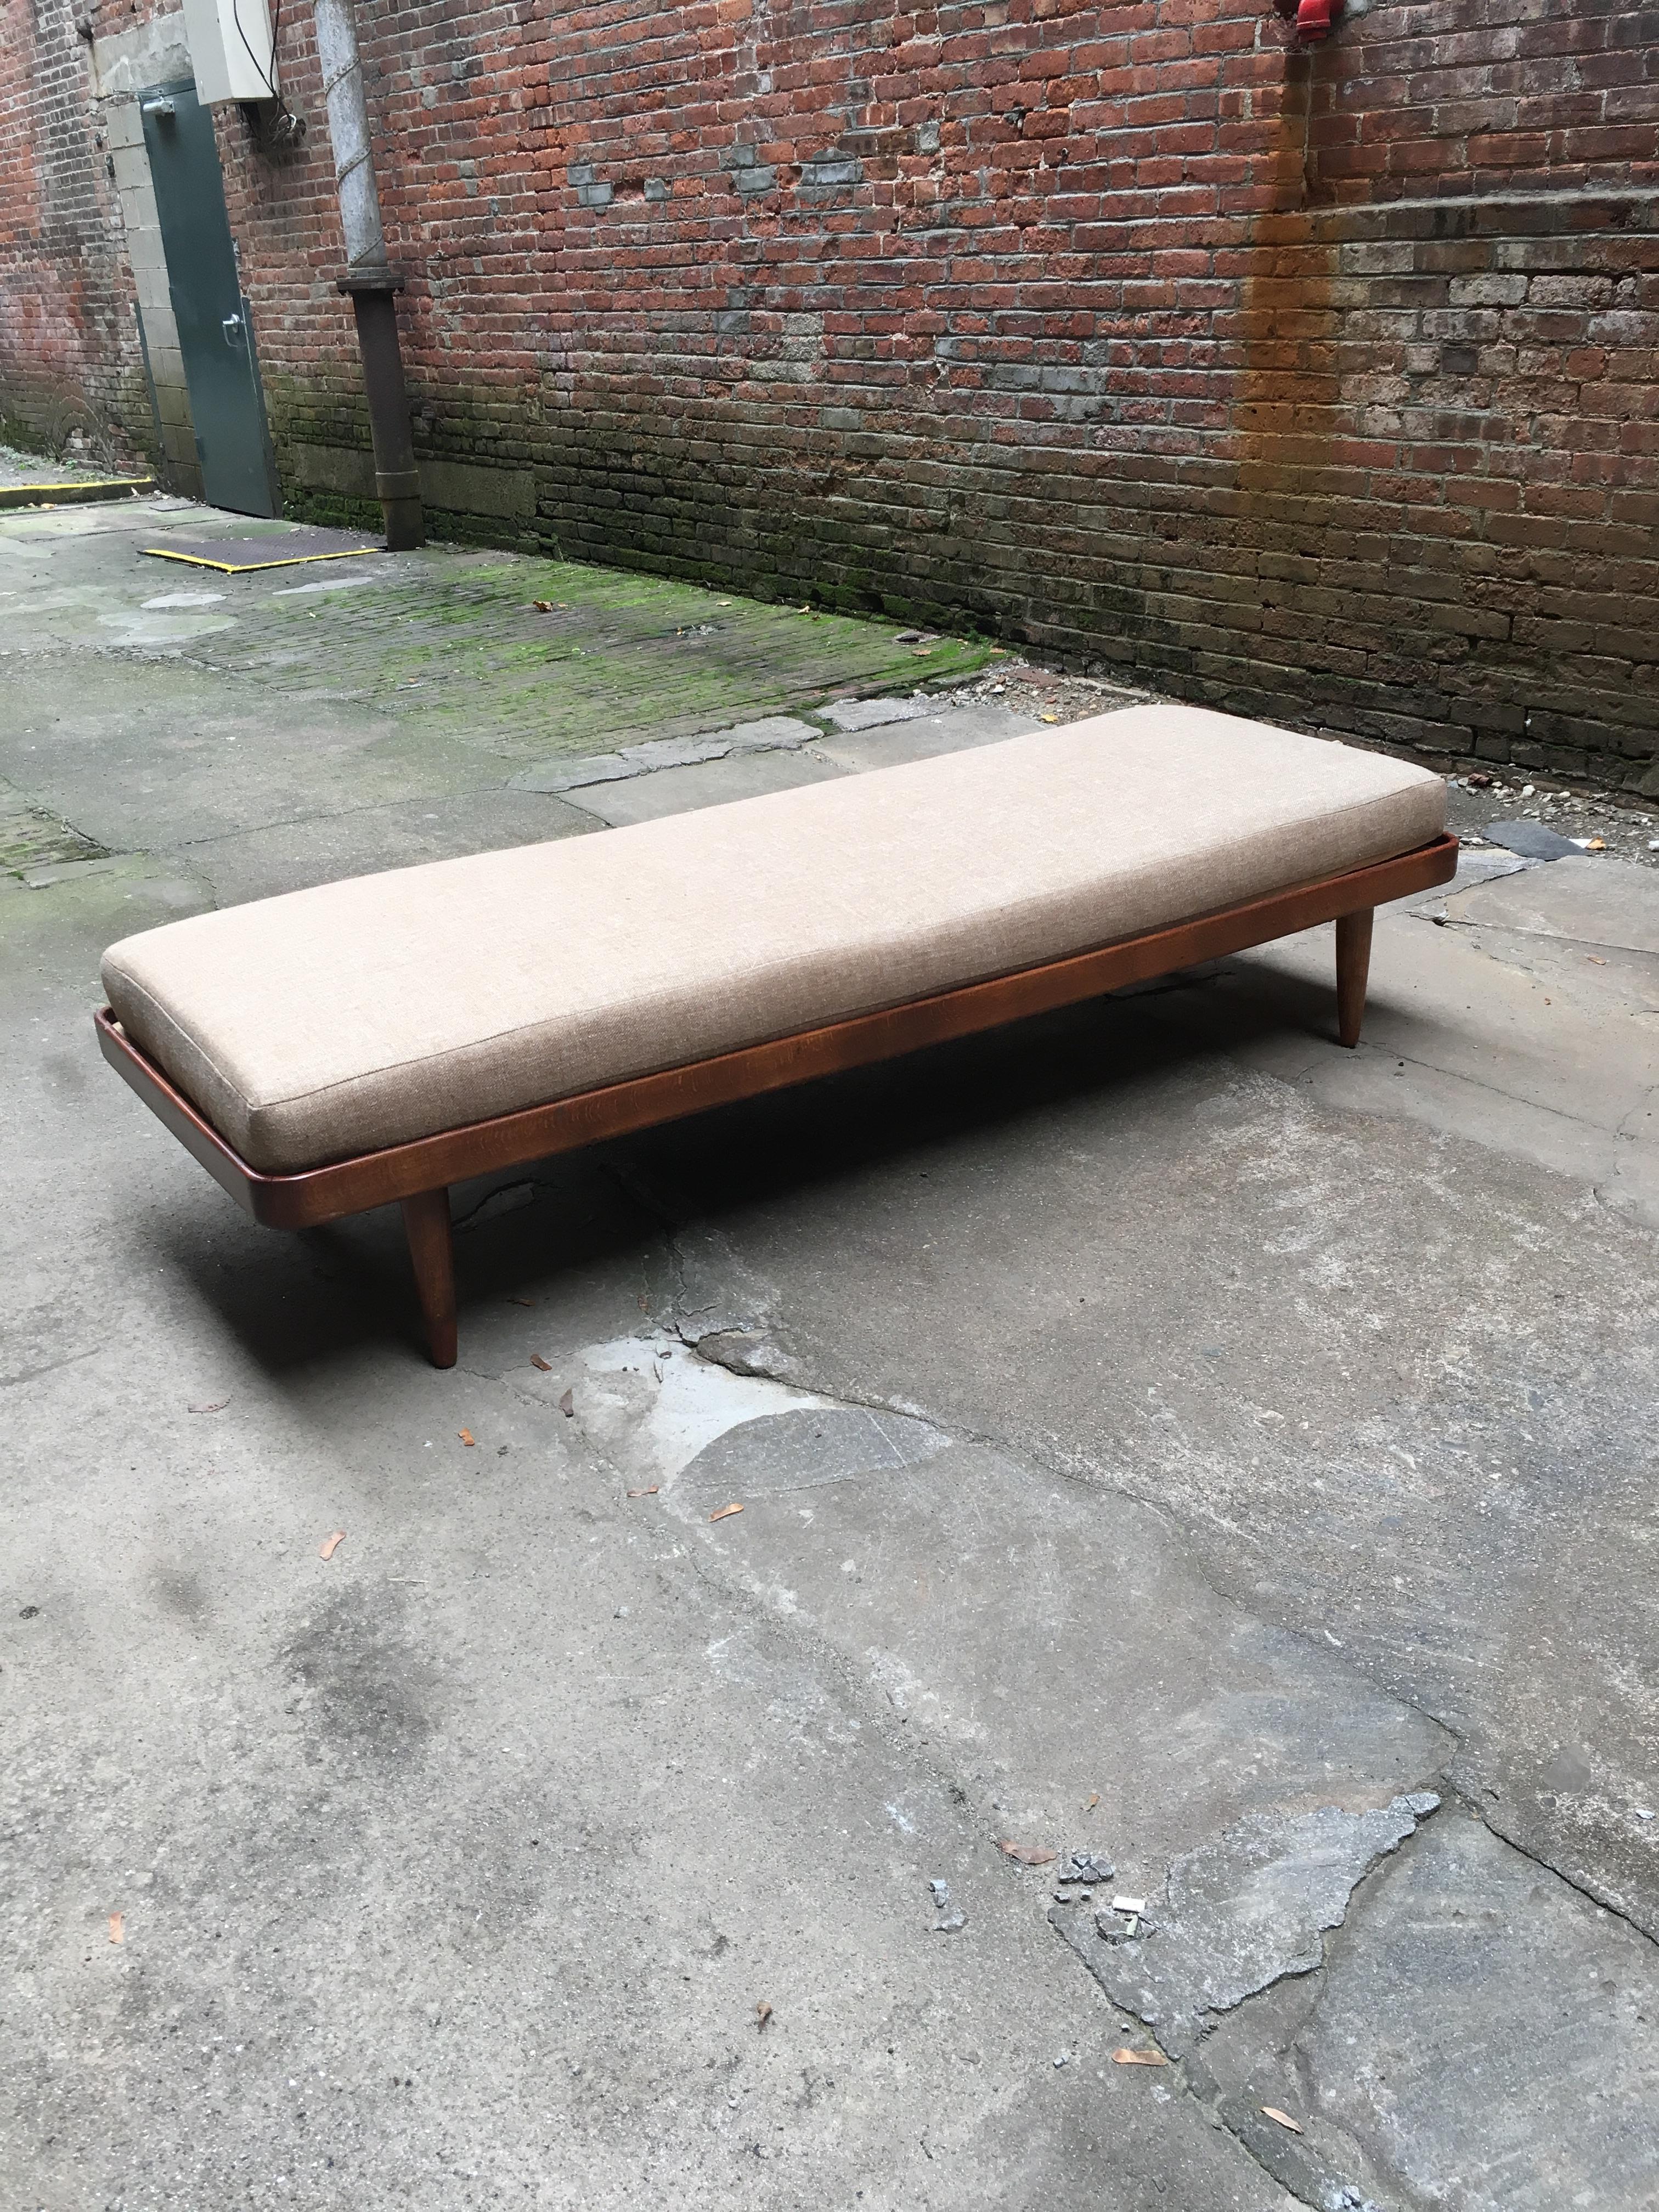 1960s Long Daybed Bench im Zustand „Gut“ in Garnerville, NY